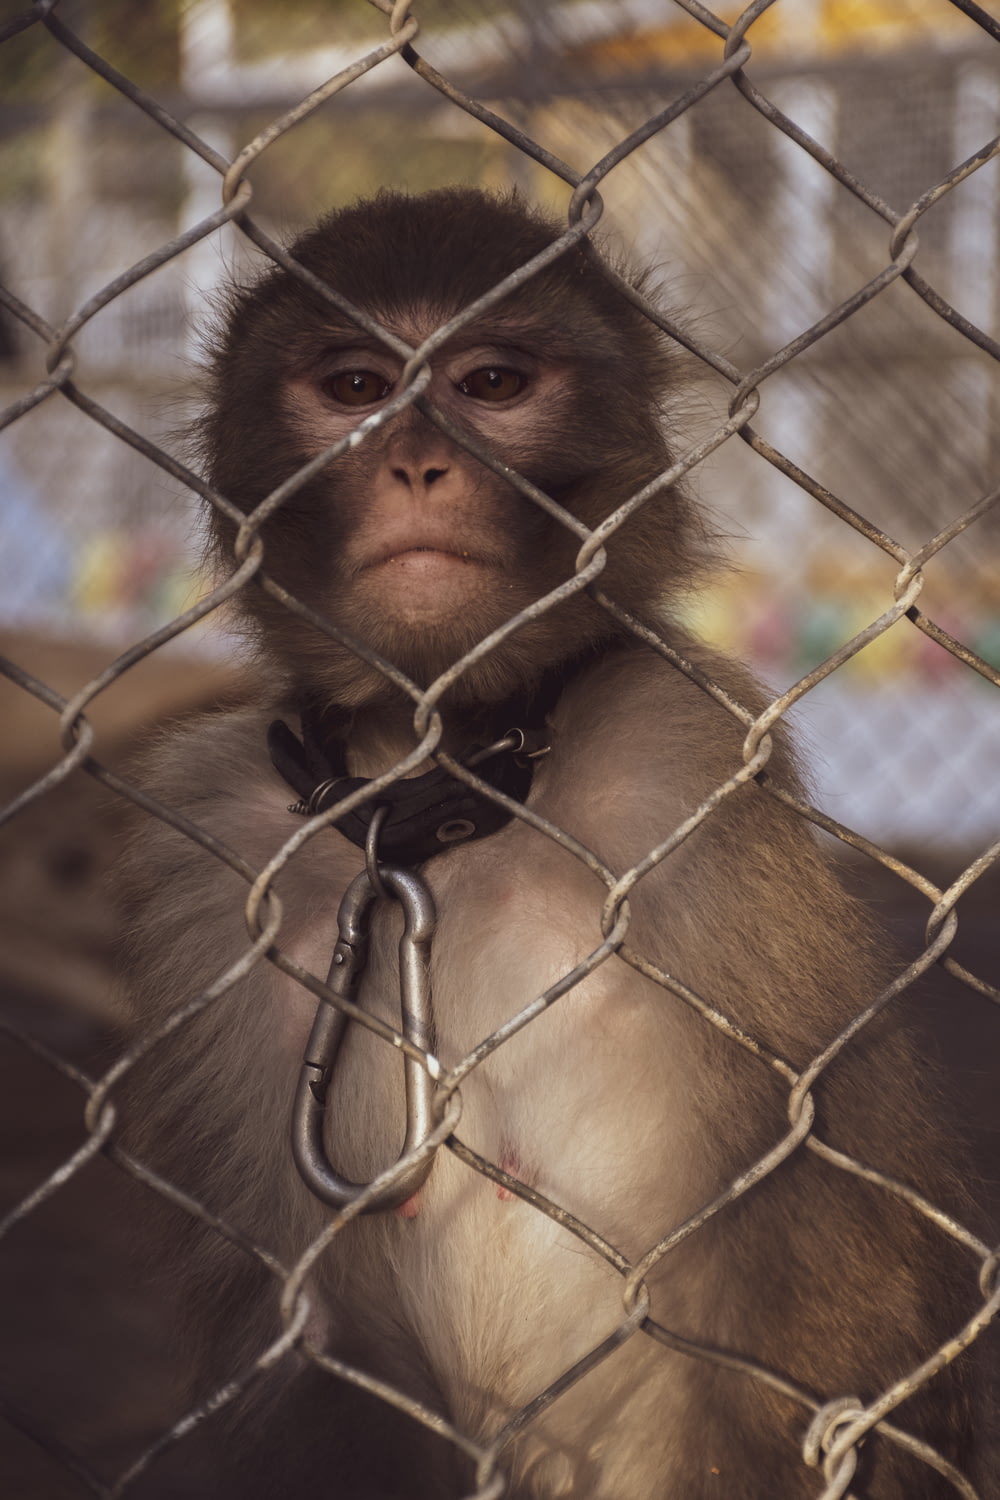 a monkey with a chain around its neck